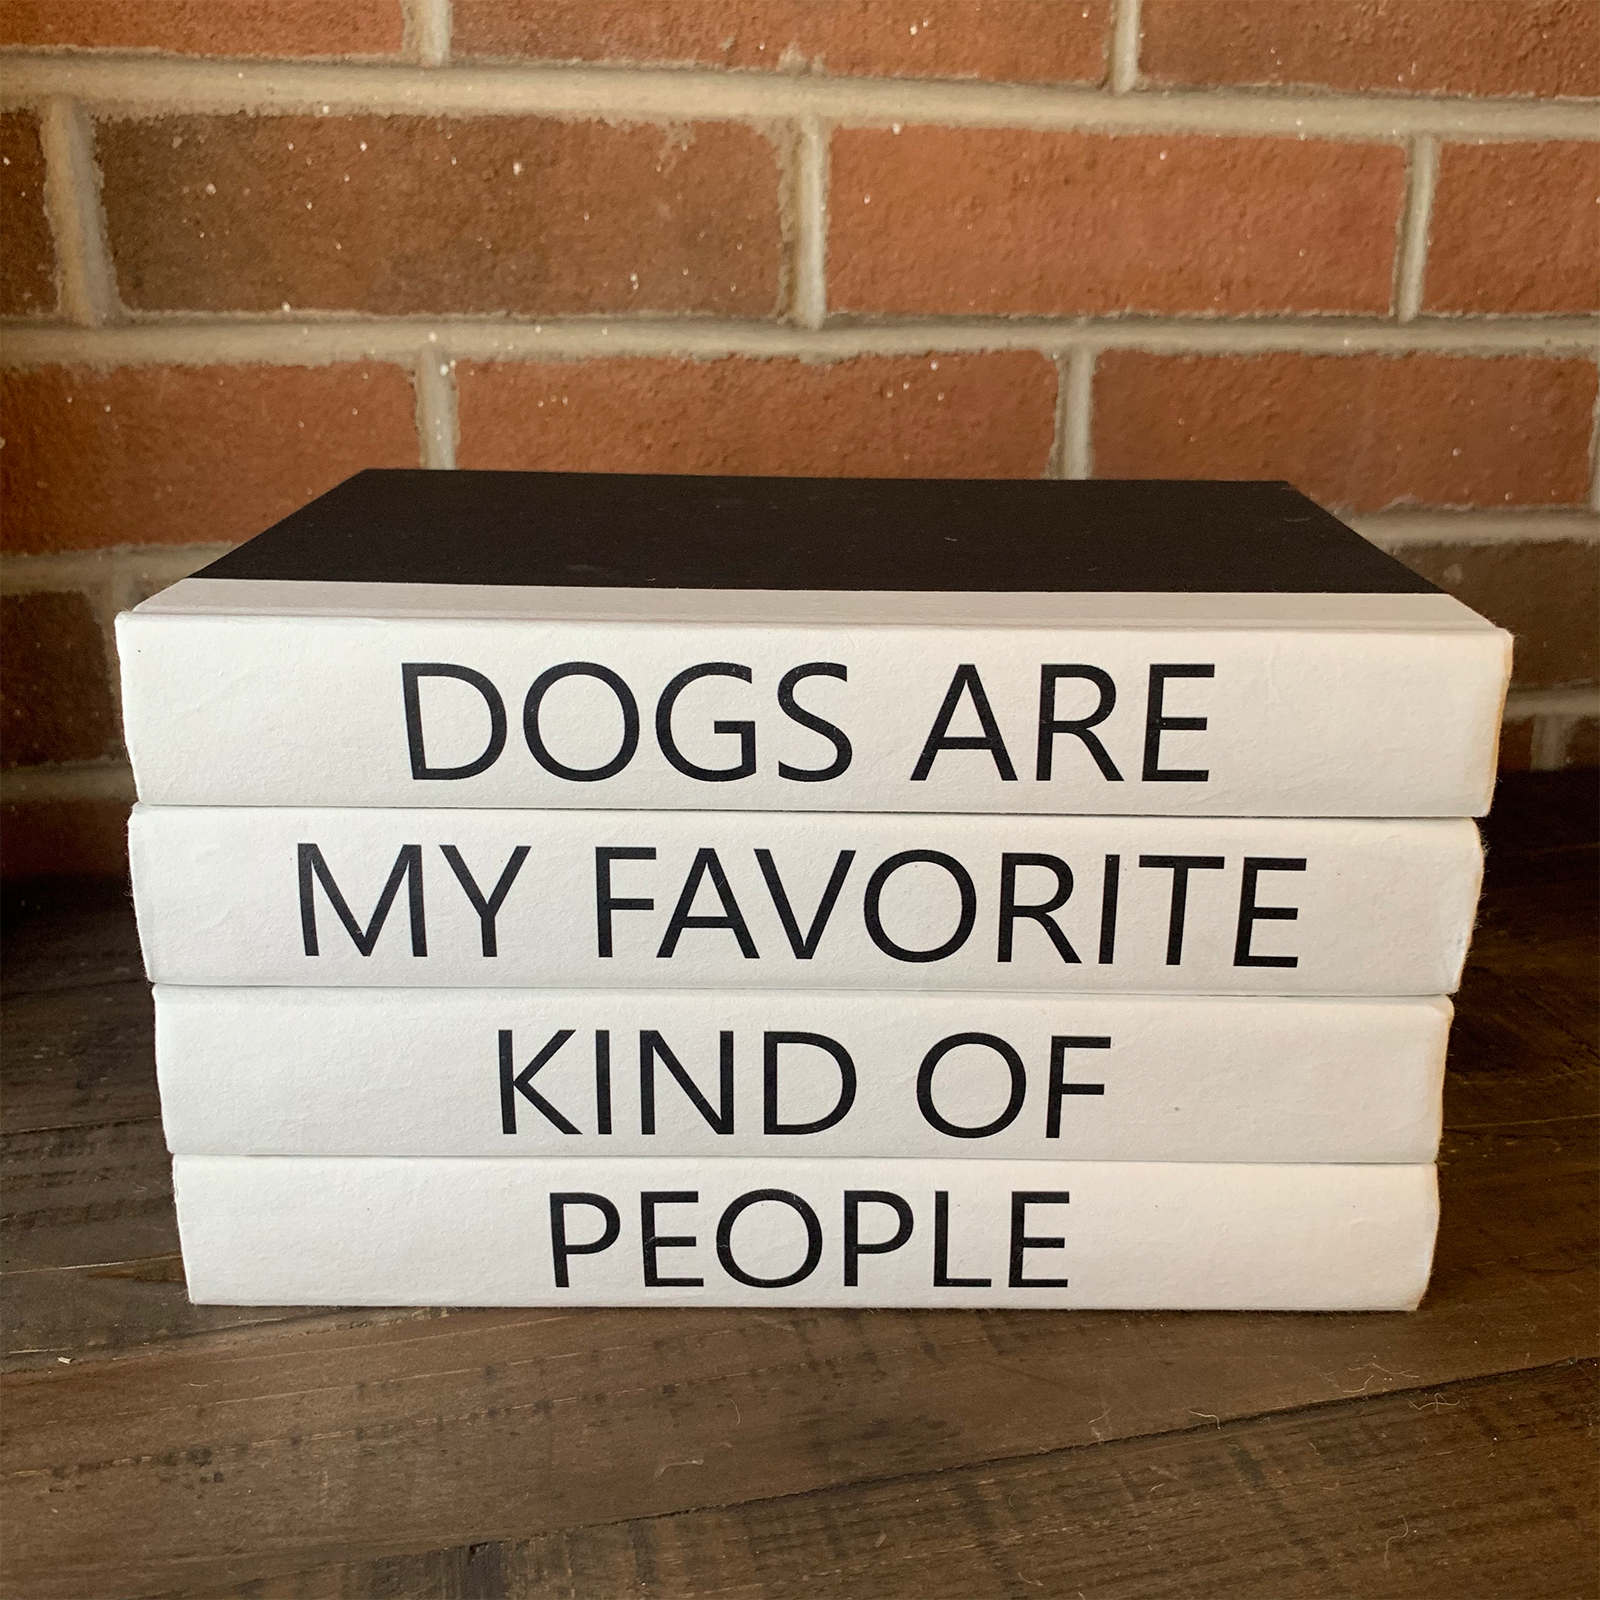 "Dogs Are My Favorite" Book Set